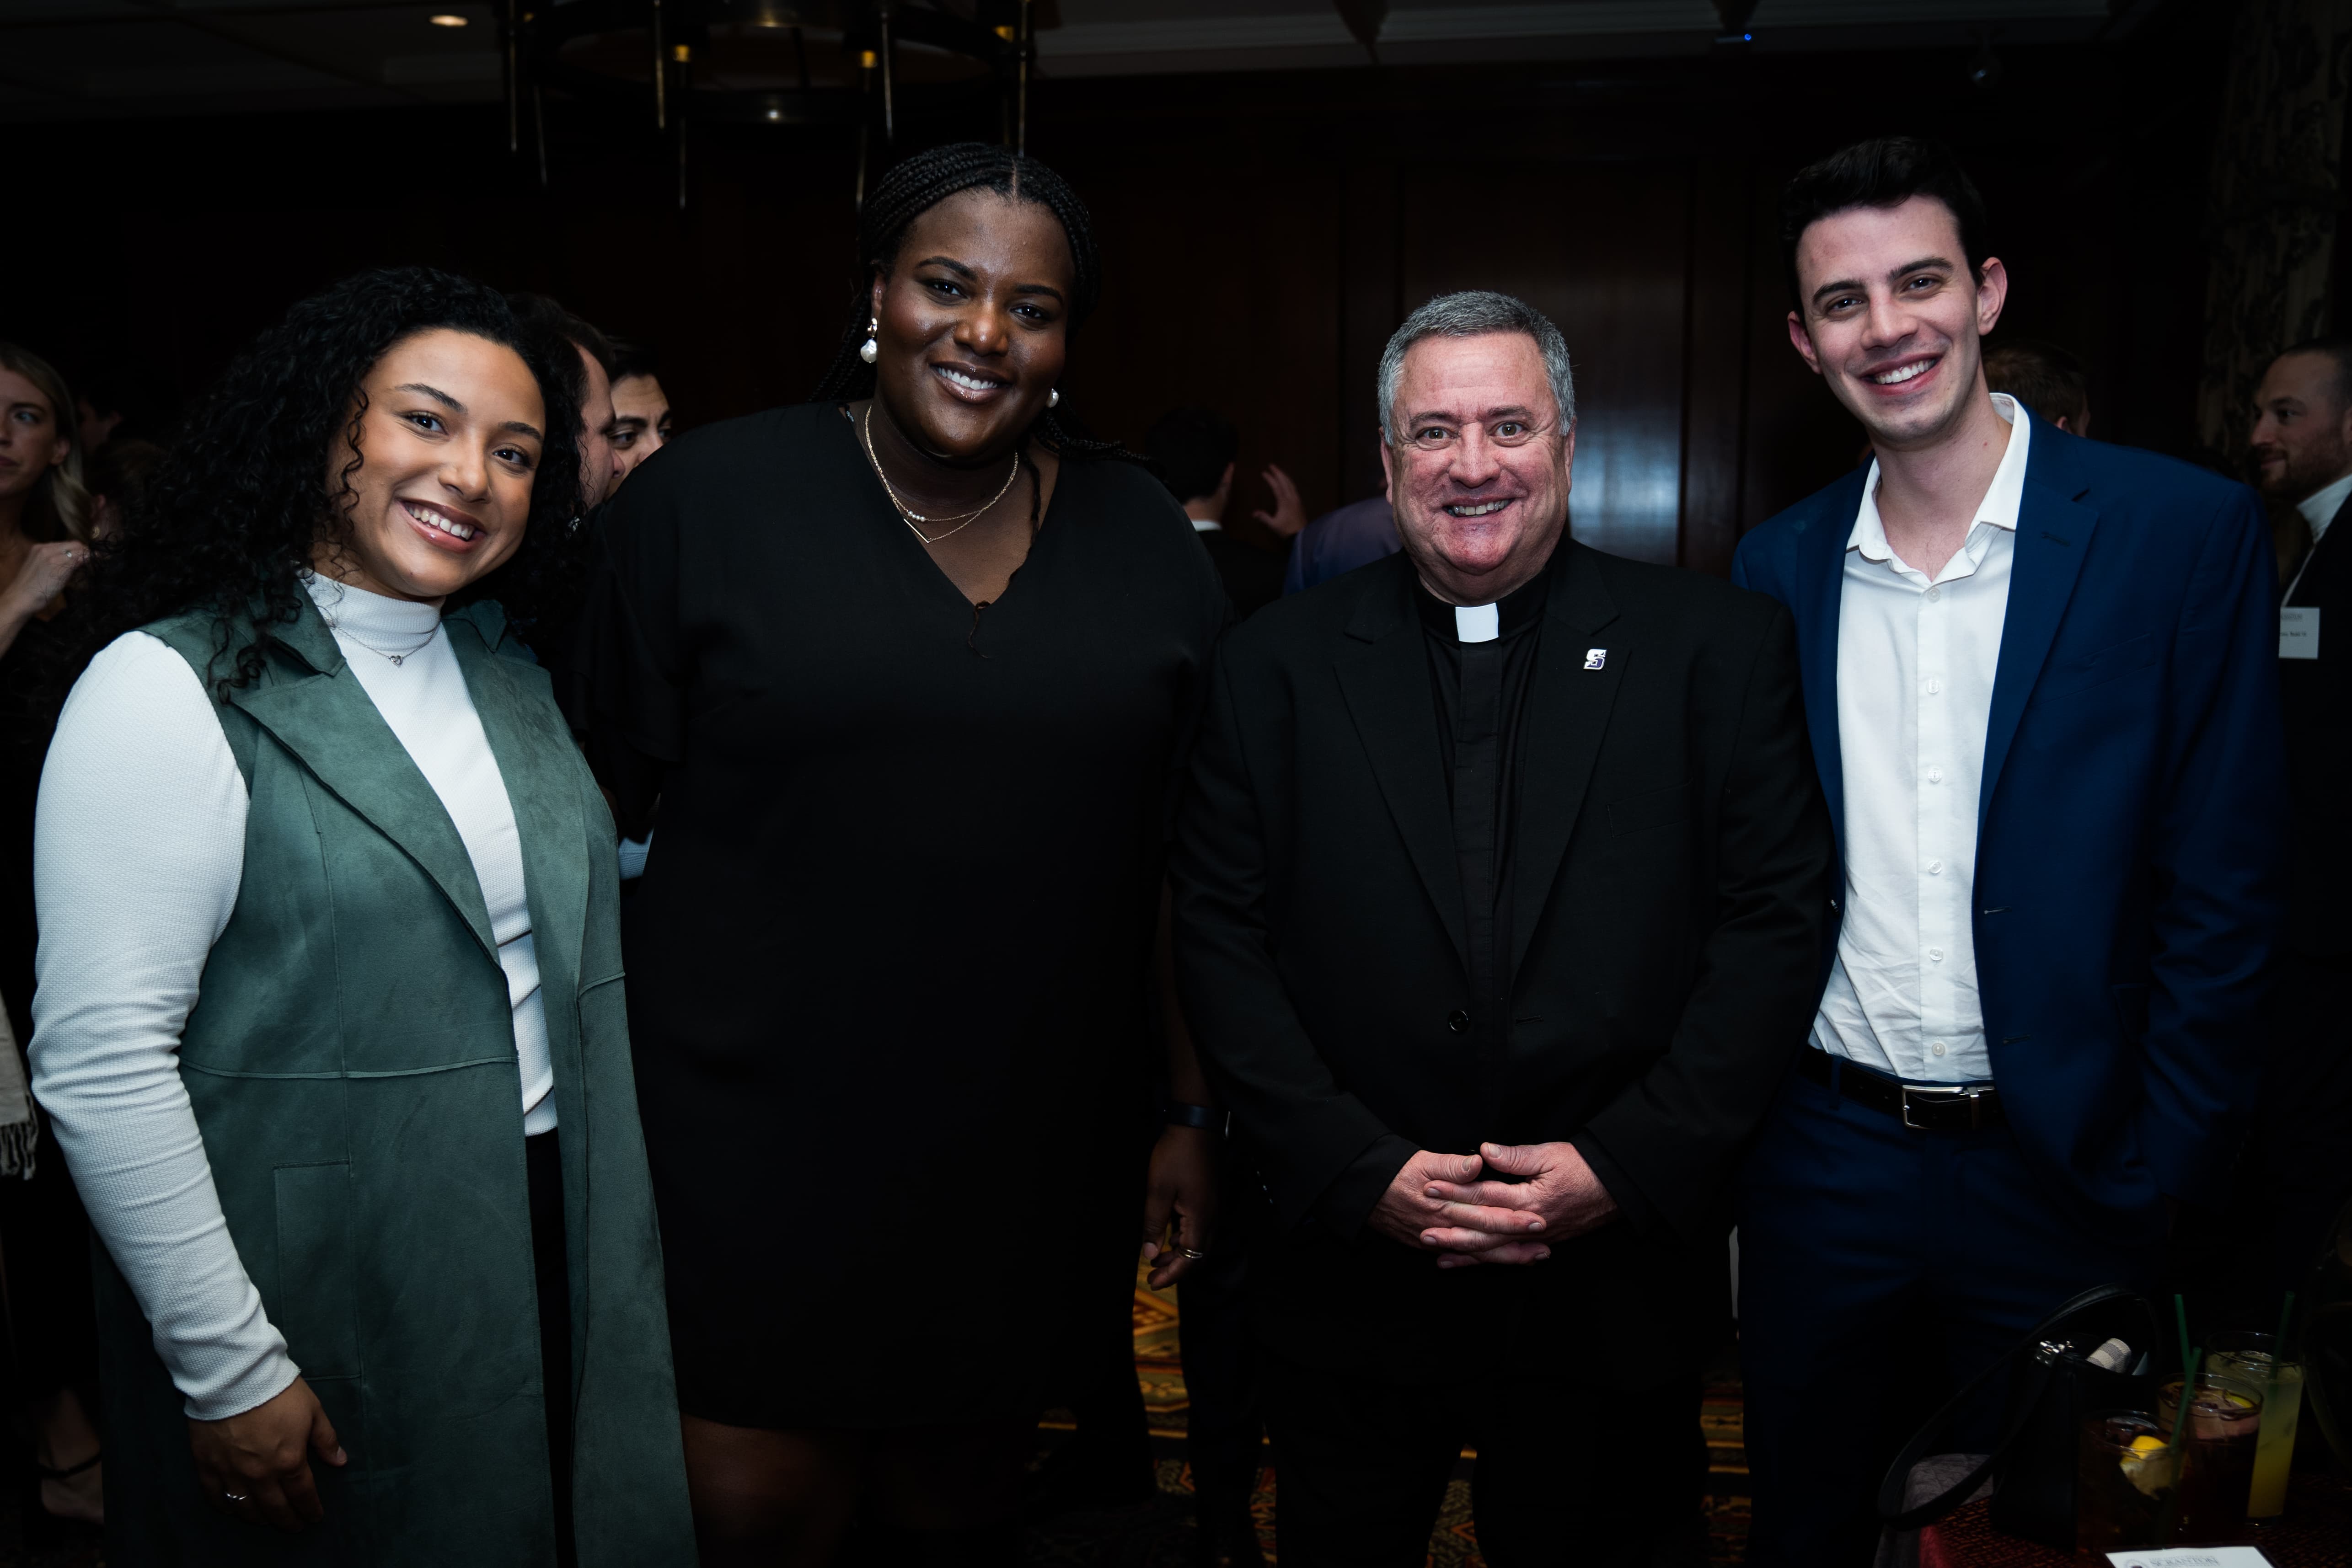 From left, Taylor Roman '21, Breanna Cole '21, Rev. Joseph G. Marina, S.J., University president, and Jeffrey Colucci '21 celebrate the Christmas season together at the New York Athletic Club on Dec. 2, 2022.